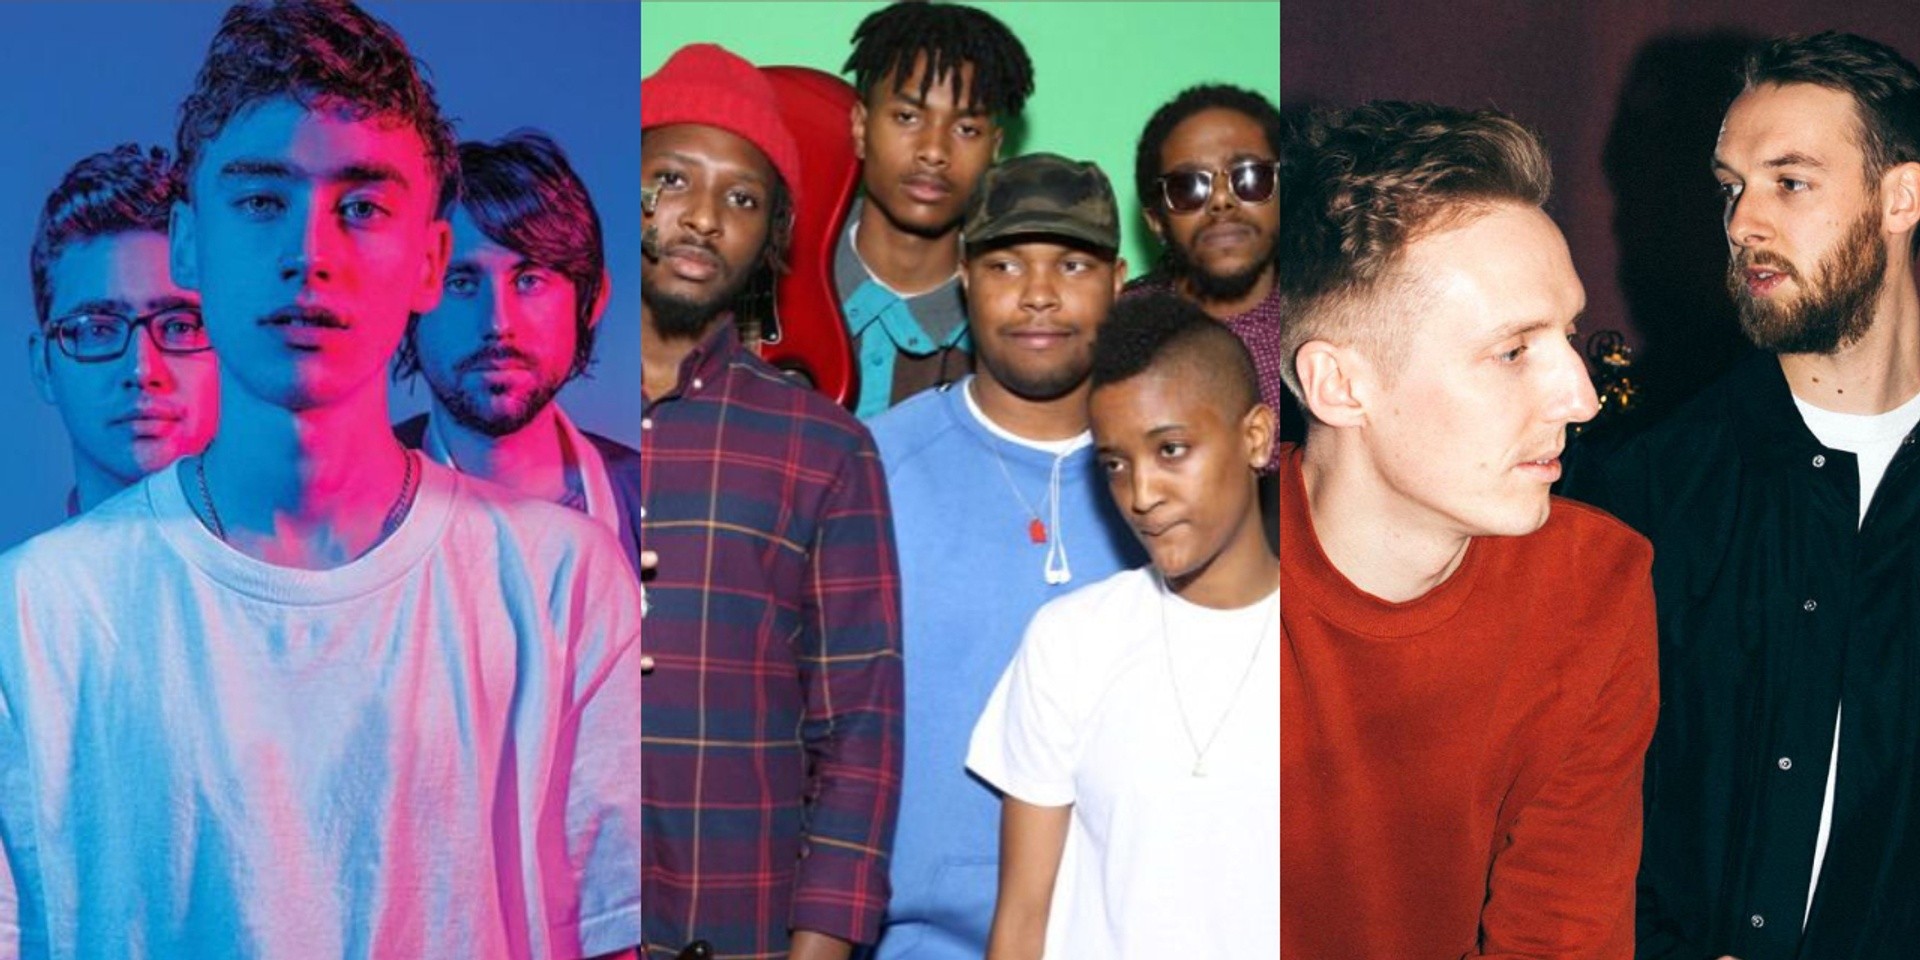 LaLaLa Festival 2019 announces line-up: Years & Years, The Internet, Honne and more